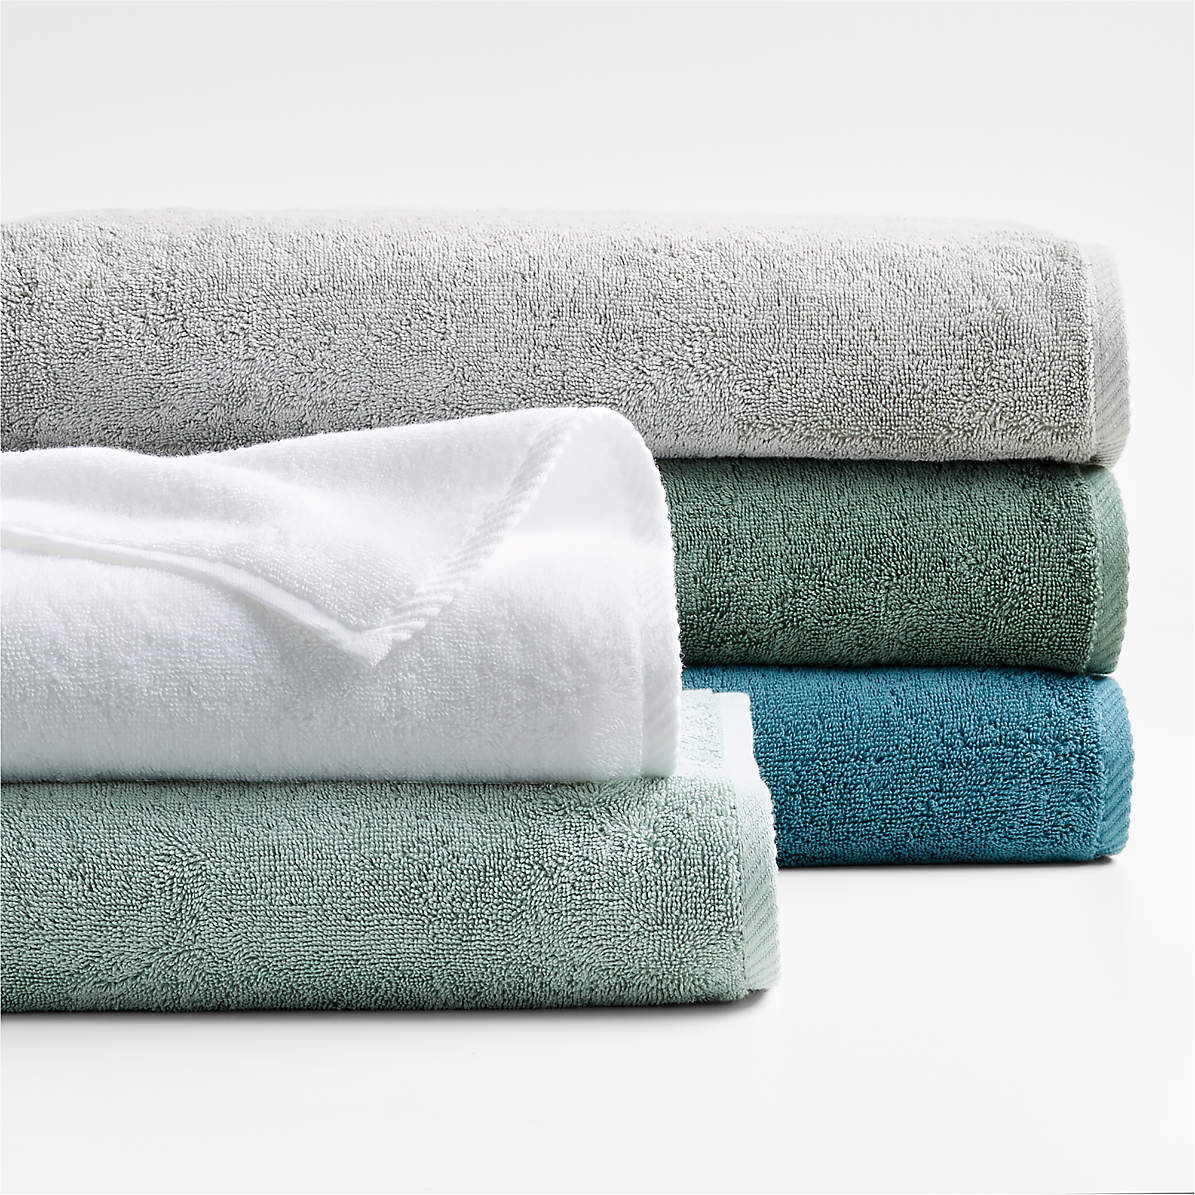 How to Wash and Dry Bath Towels